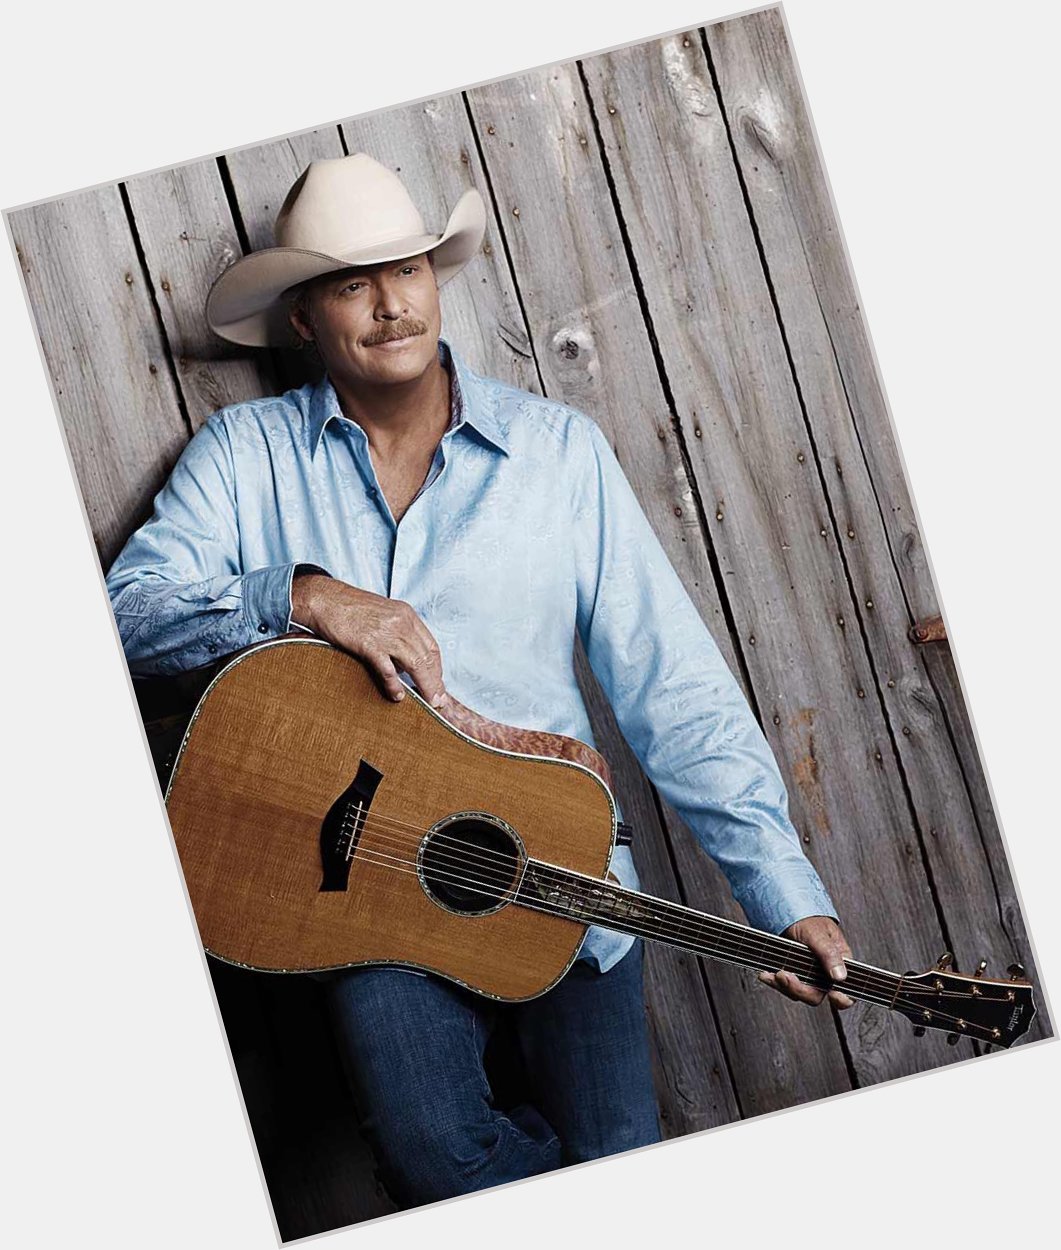 Happy 61st birthday to Alan Jackson! 

What is your favorite Alan song? 